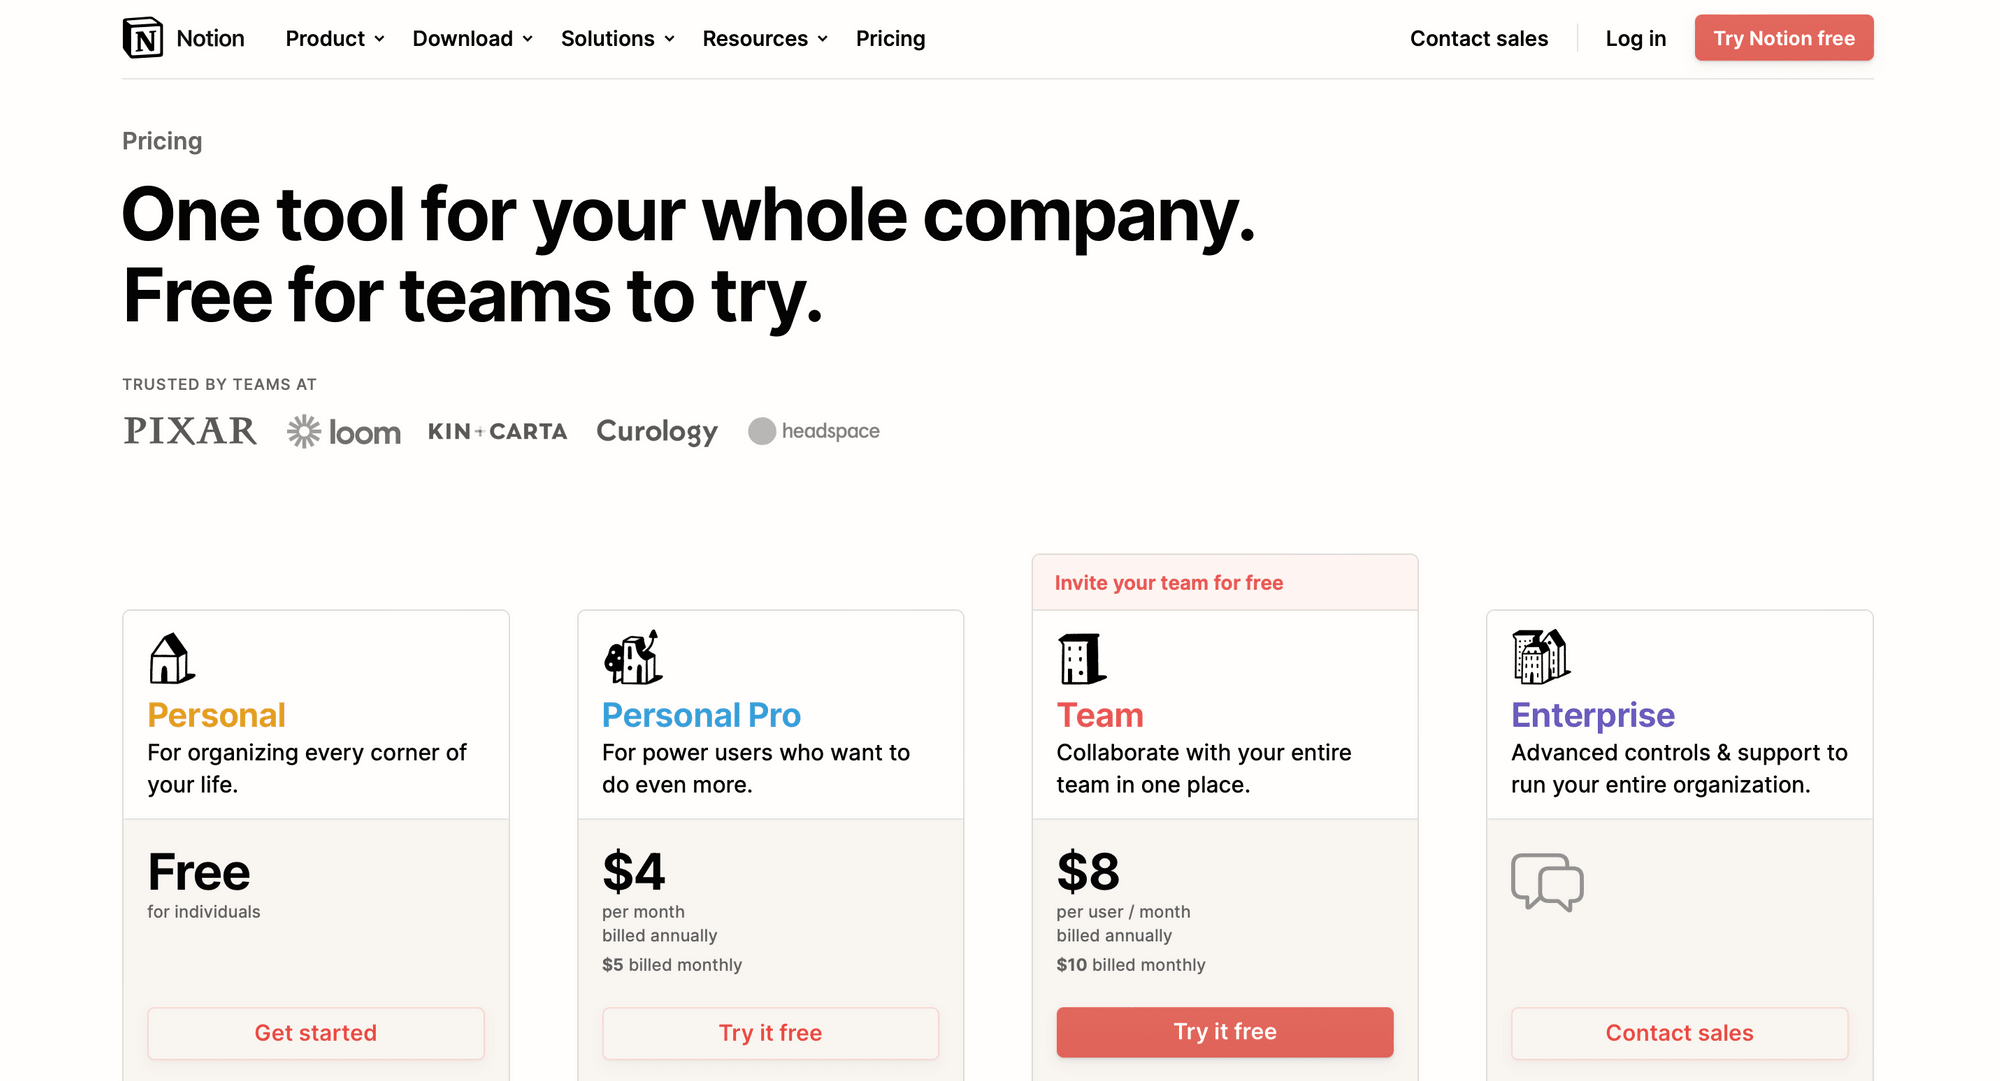 Screenshot of Notion pricing page